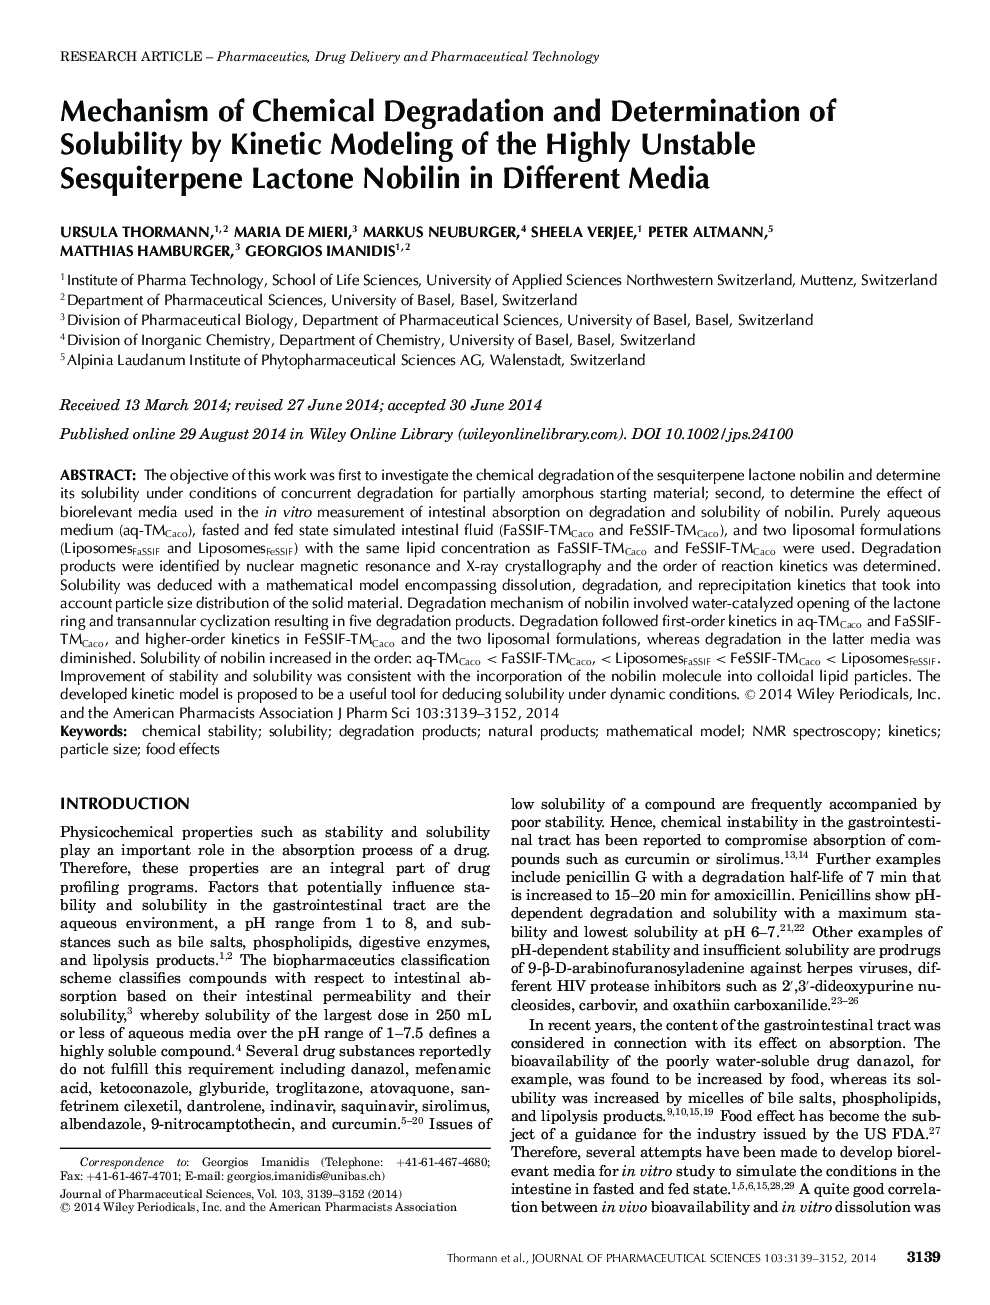 Mechanism of Chemical Degradation and Determination of Solubility by Kinetic Modeling of the Highly Unstable Sesquiterpene Lactone Nobilin in Different Media